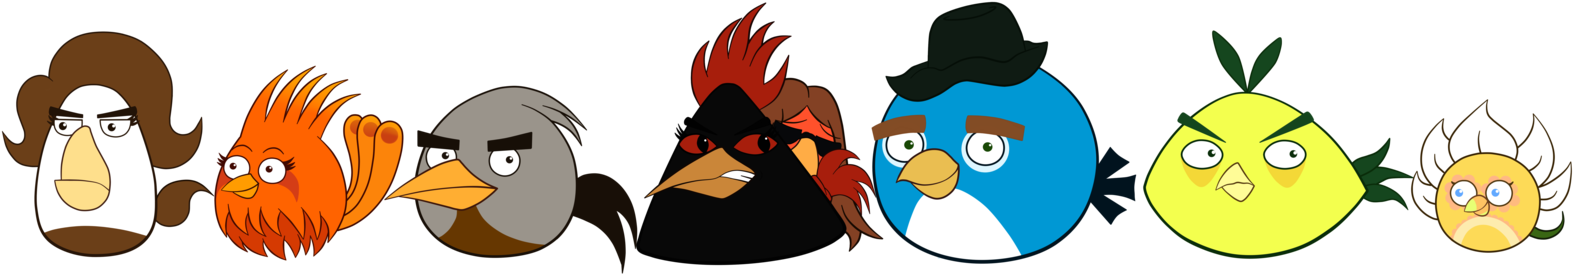 More Like Hammer Bird By Riverkpocc - Openclipart (1600x408)